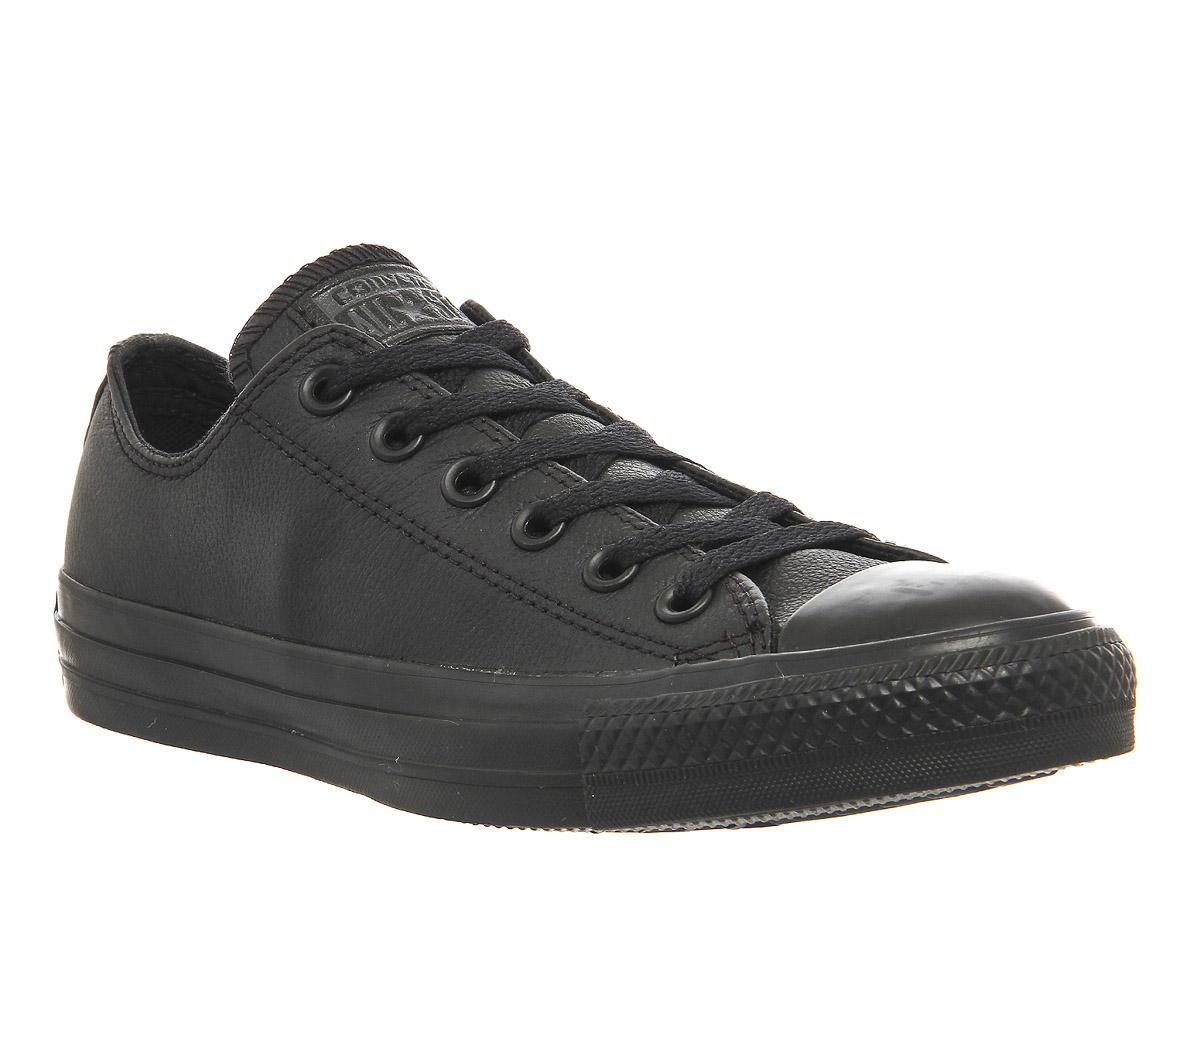 Converse All Star Low Leather Black Mono Leather - Unisex Sports